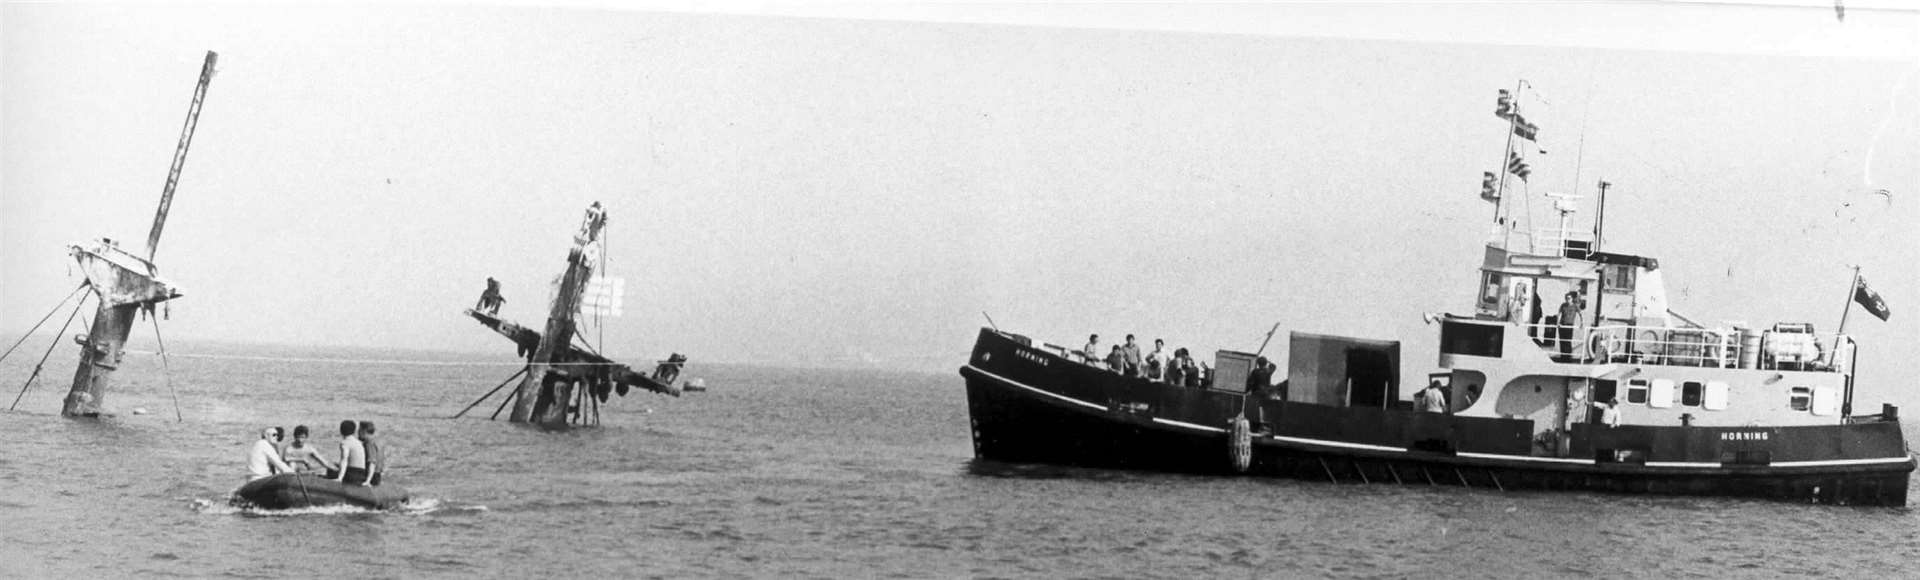 The Richard Montgomery wreck off Sheerness, August 14, 1981